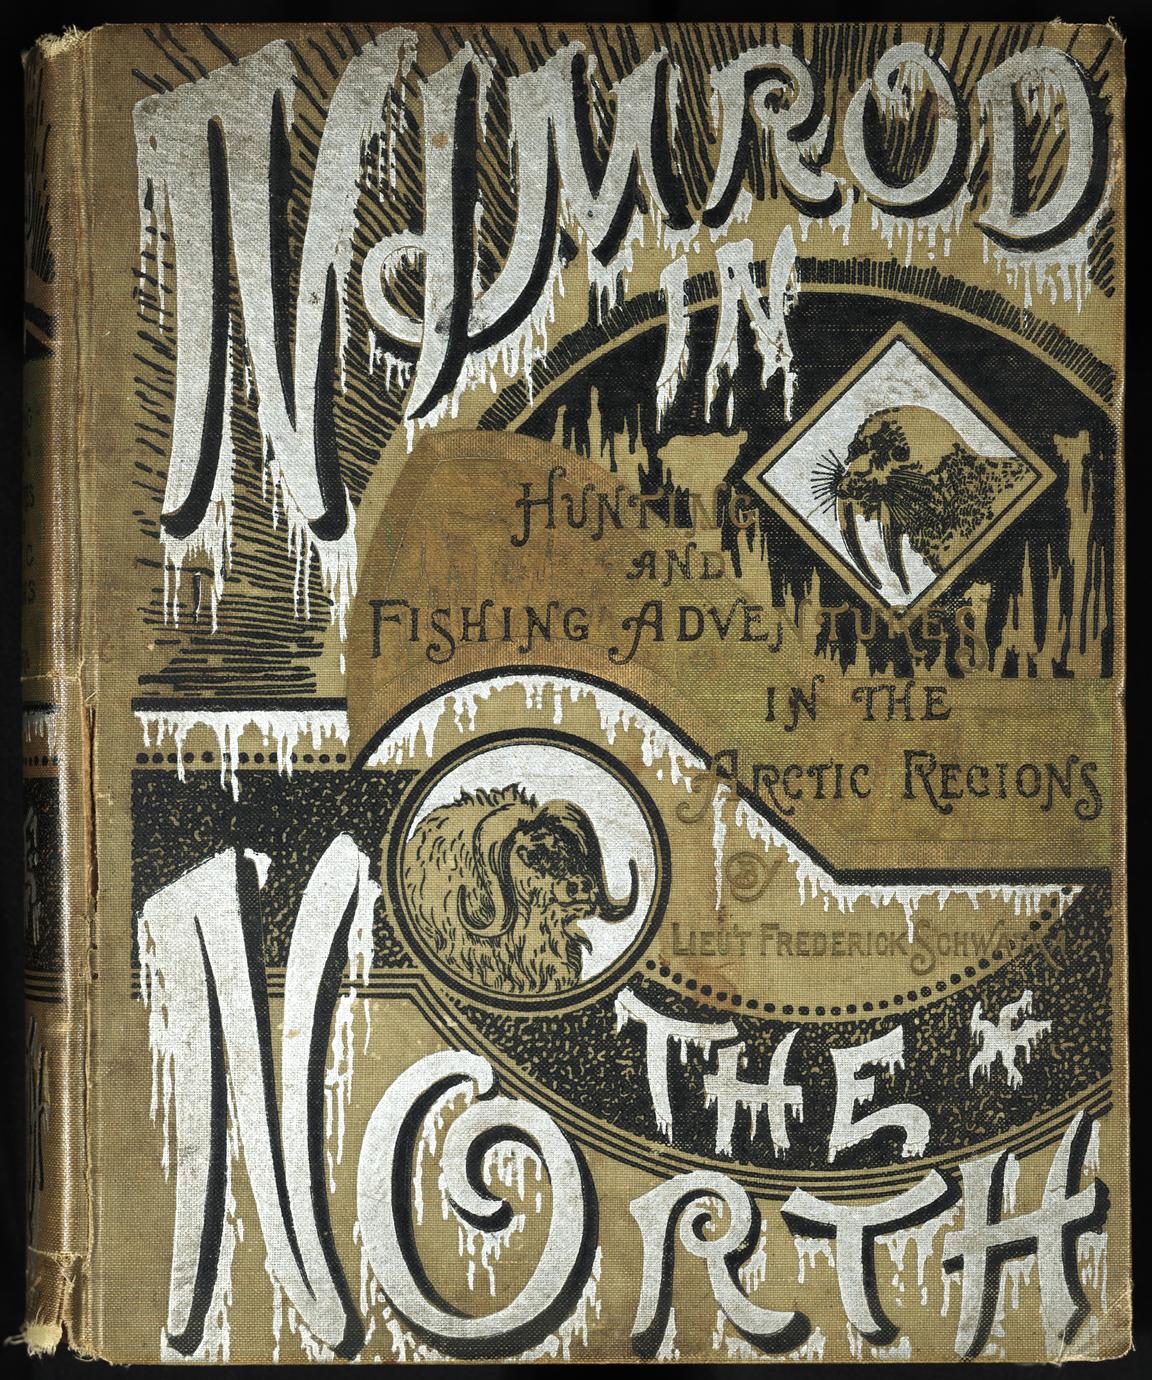 Nimrod in the North, or, Hunting and fishing adventures in the Arctic  regions (1 of 2) - UWDC - UW-Madison Libraries